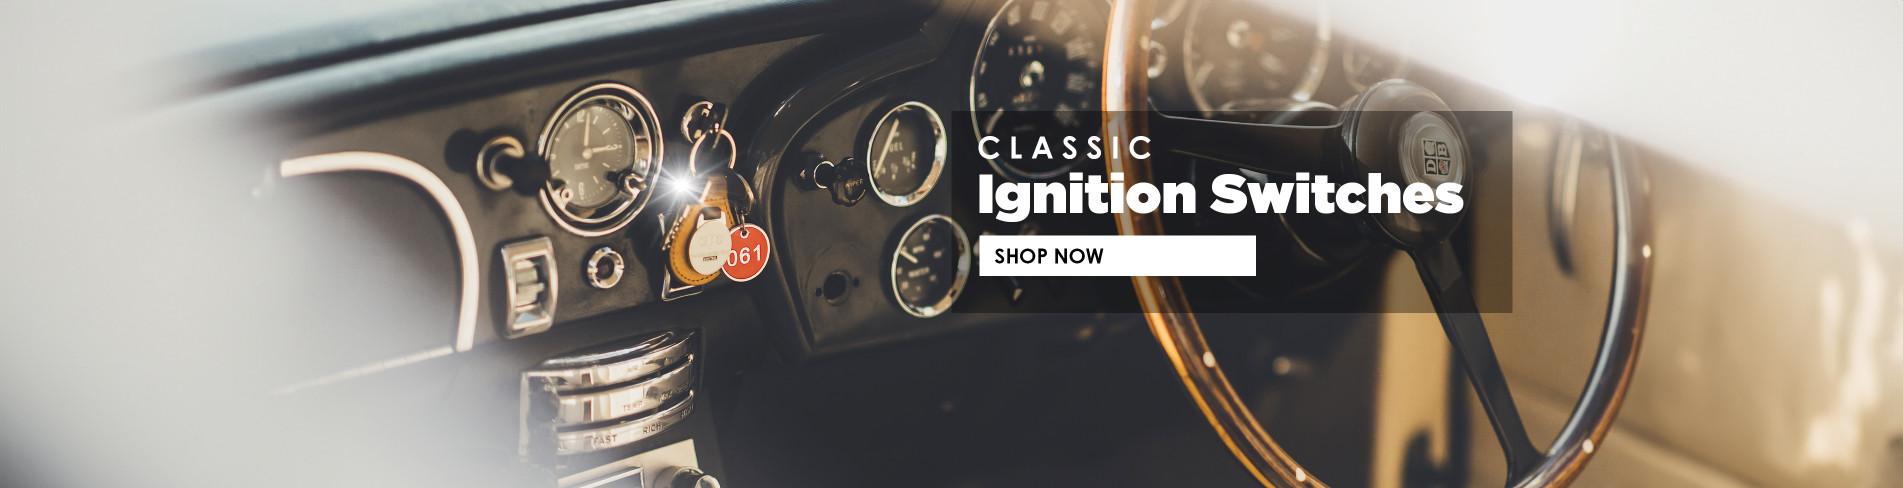 Classic Ignition Switches